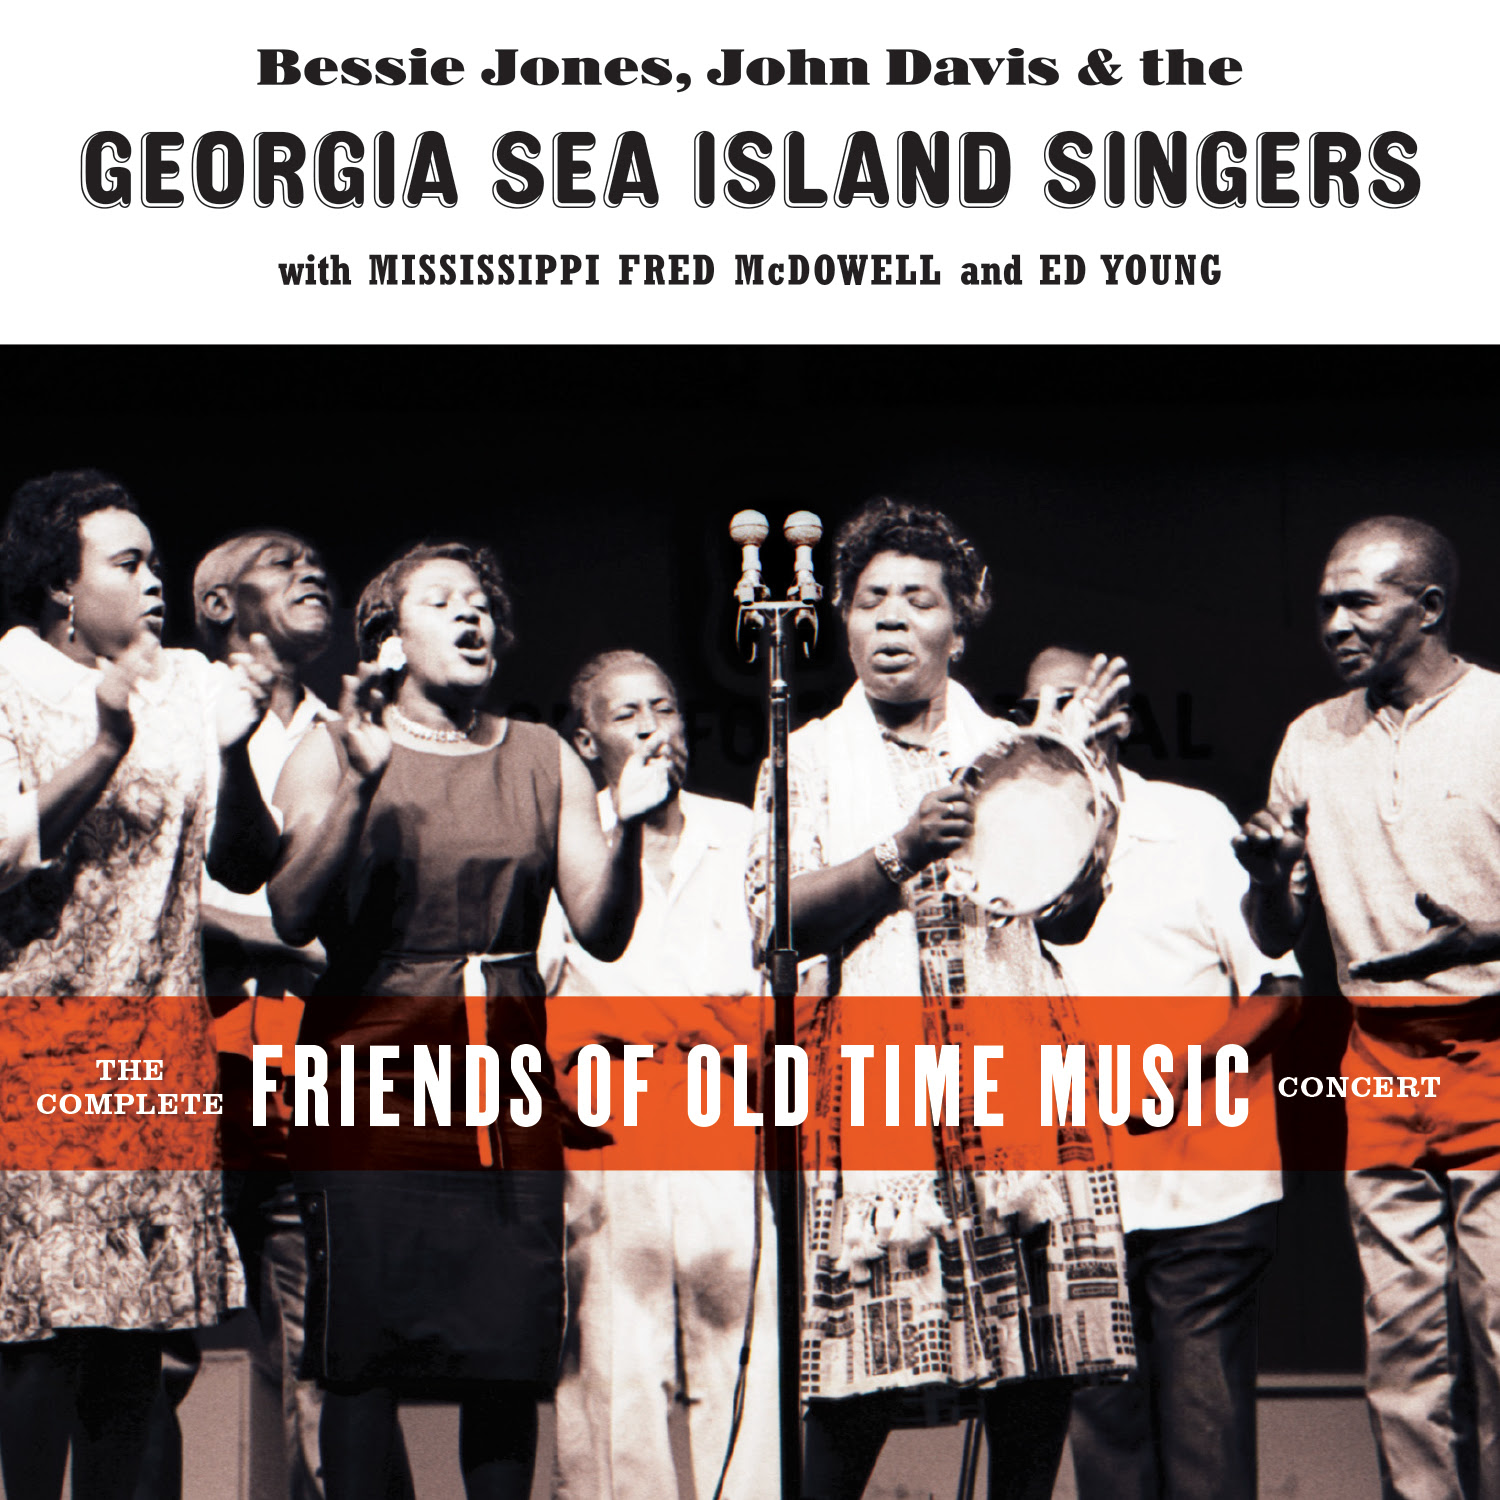 Smithsonian Folkways' Remarkable Album Out Today Brings Together the Georgia Sea Island Singers and Mississippi Fred McDowell